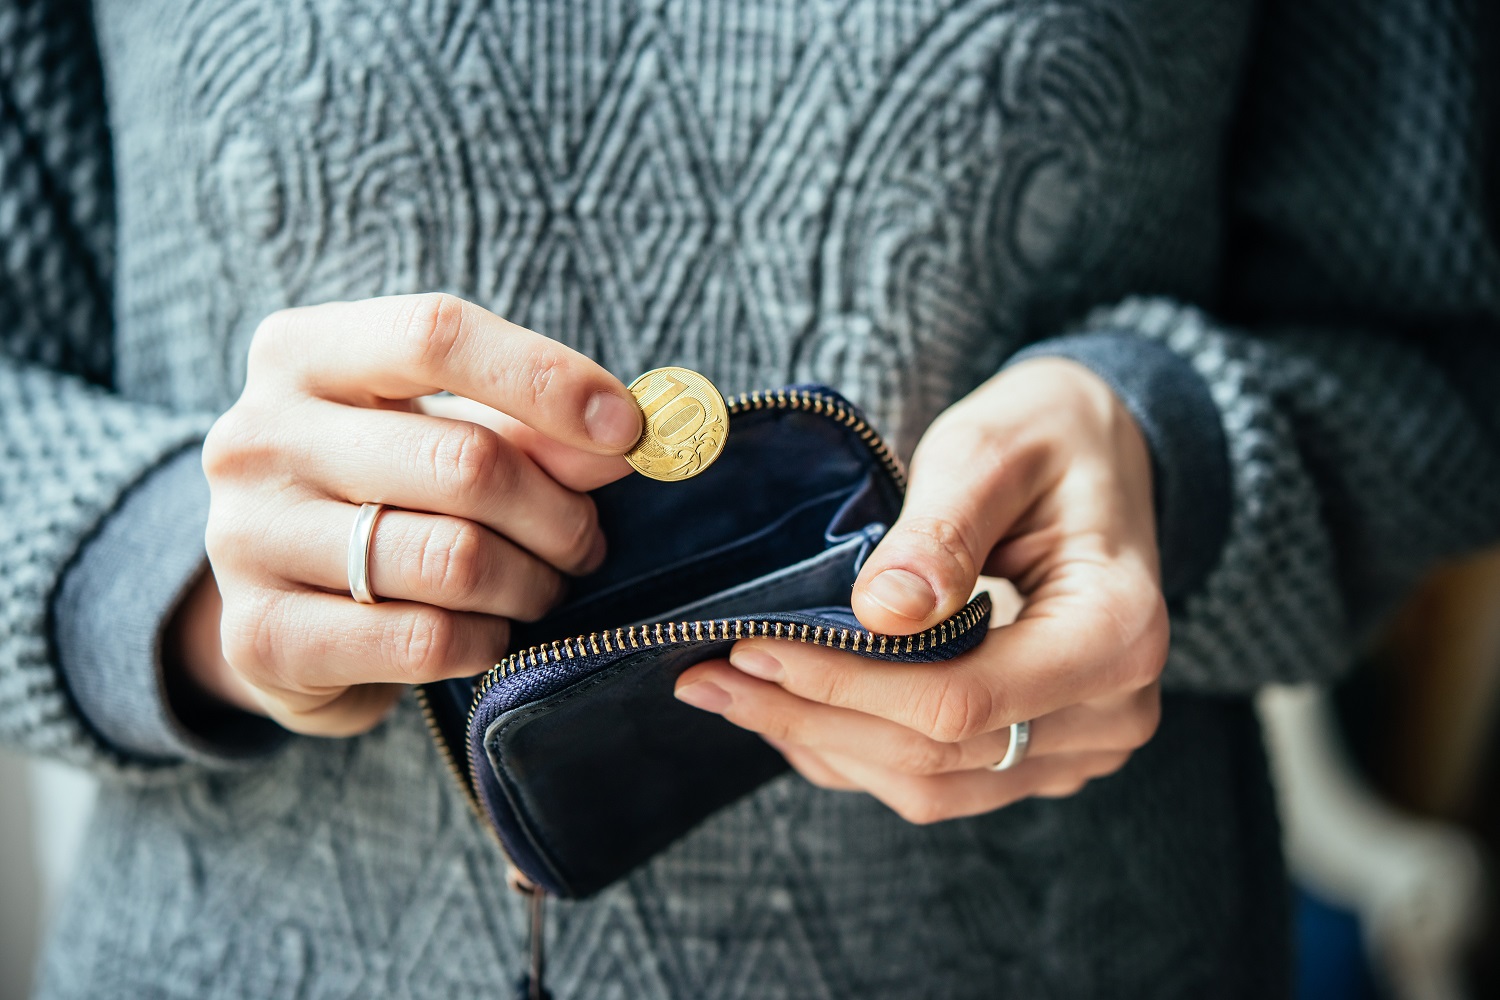 A person wearing a grey sweater removes a Russian coin from a black leather wallet.